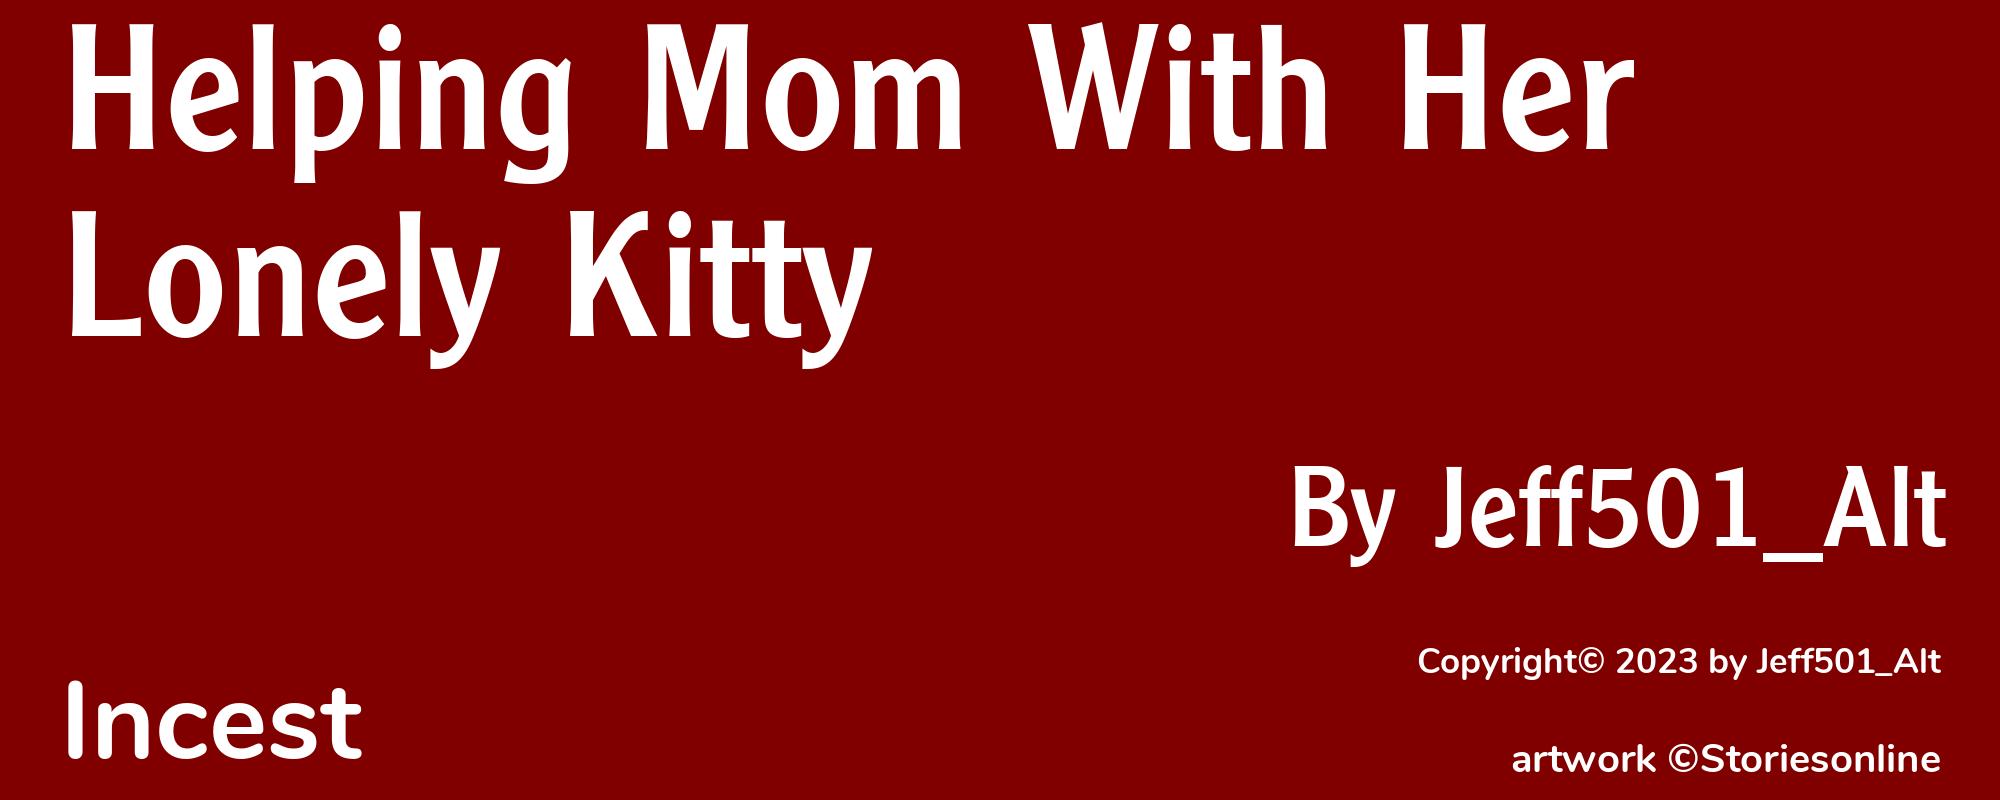 Helping Mom With Her Lonely Kitty - Cover